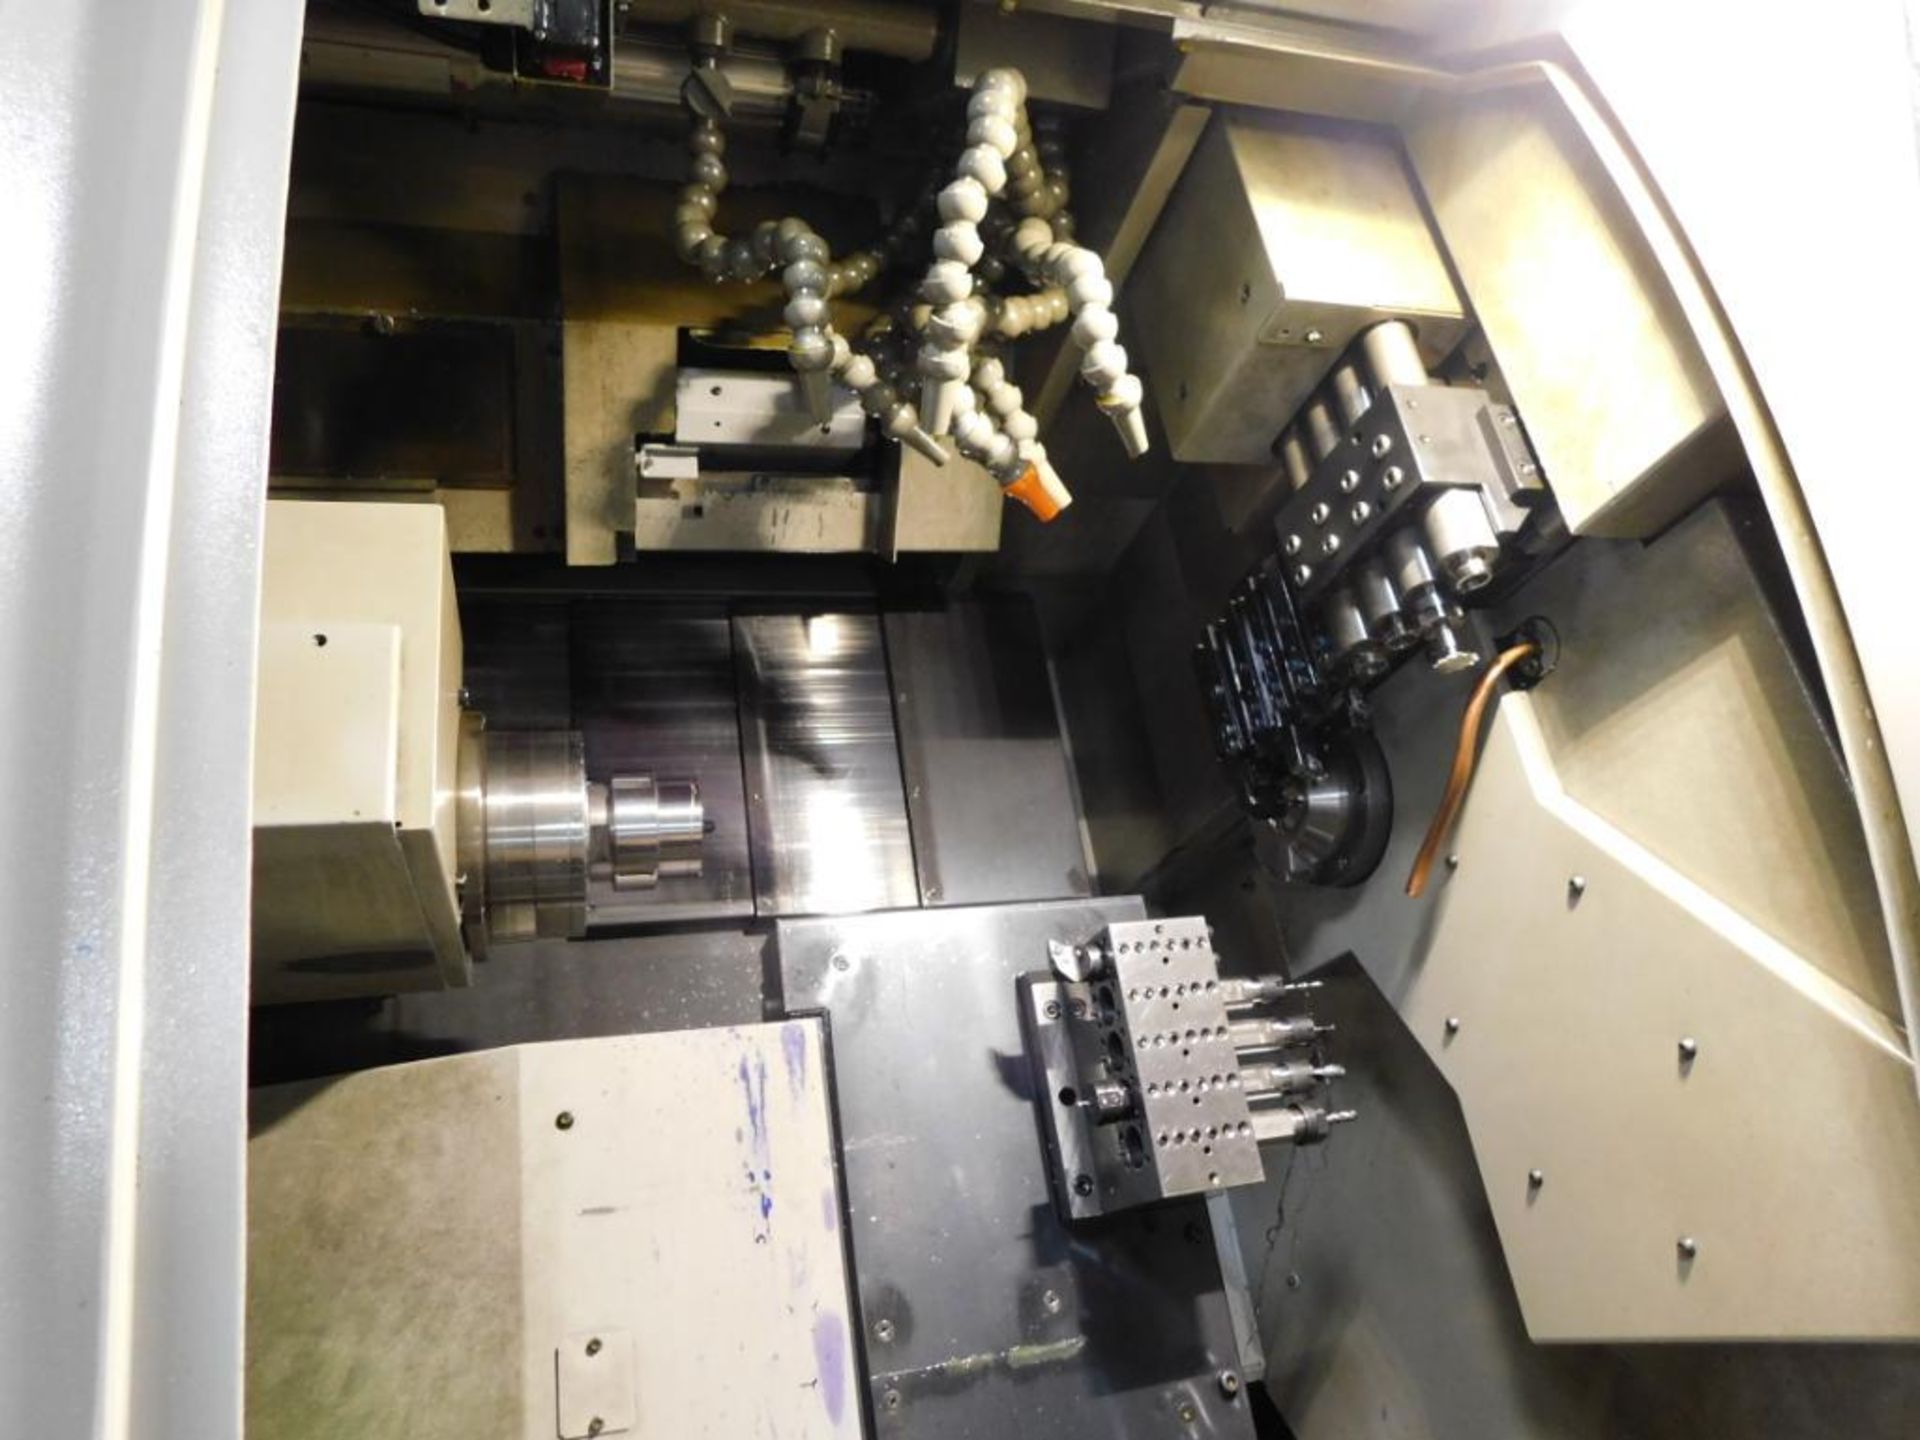 Citizen CNC Swiss Style Turning Center, Model Cincom C32 Type VIII, S/N E324-X12013 (2004), w/Citize - Image 7 of 8